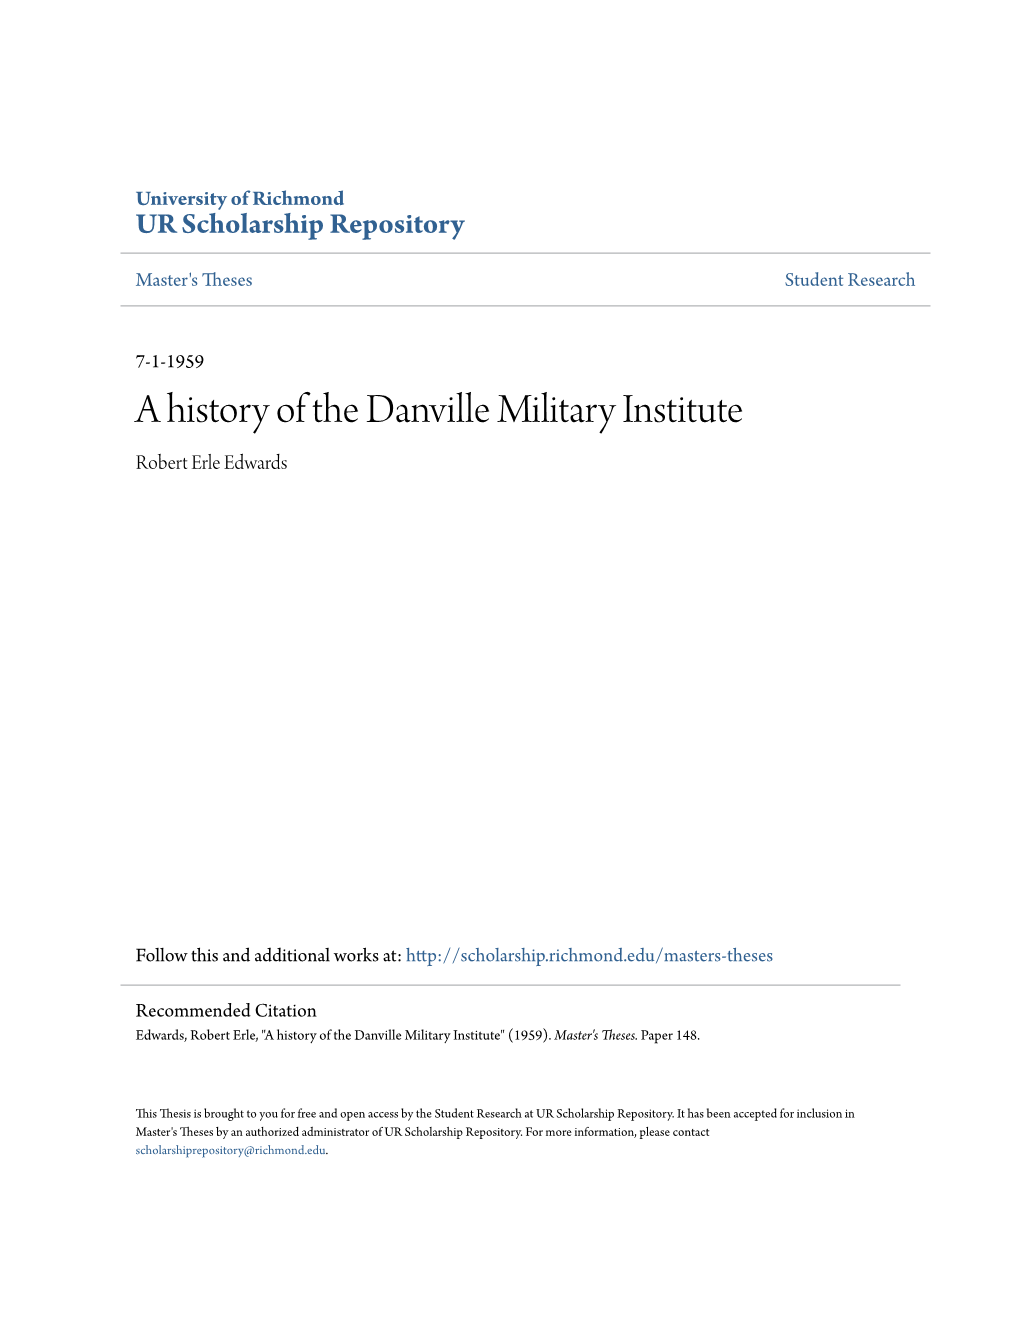 A History of the Danville Military Institute Robert Erle Edwards